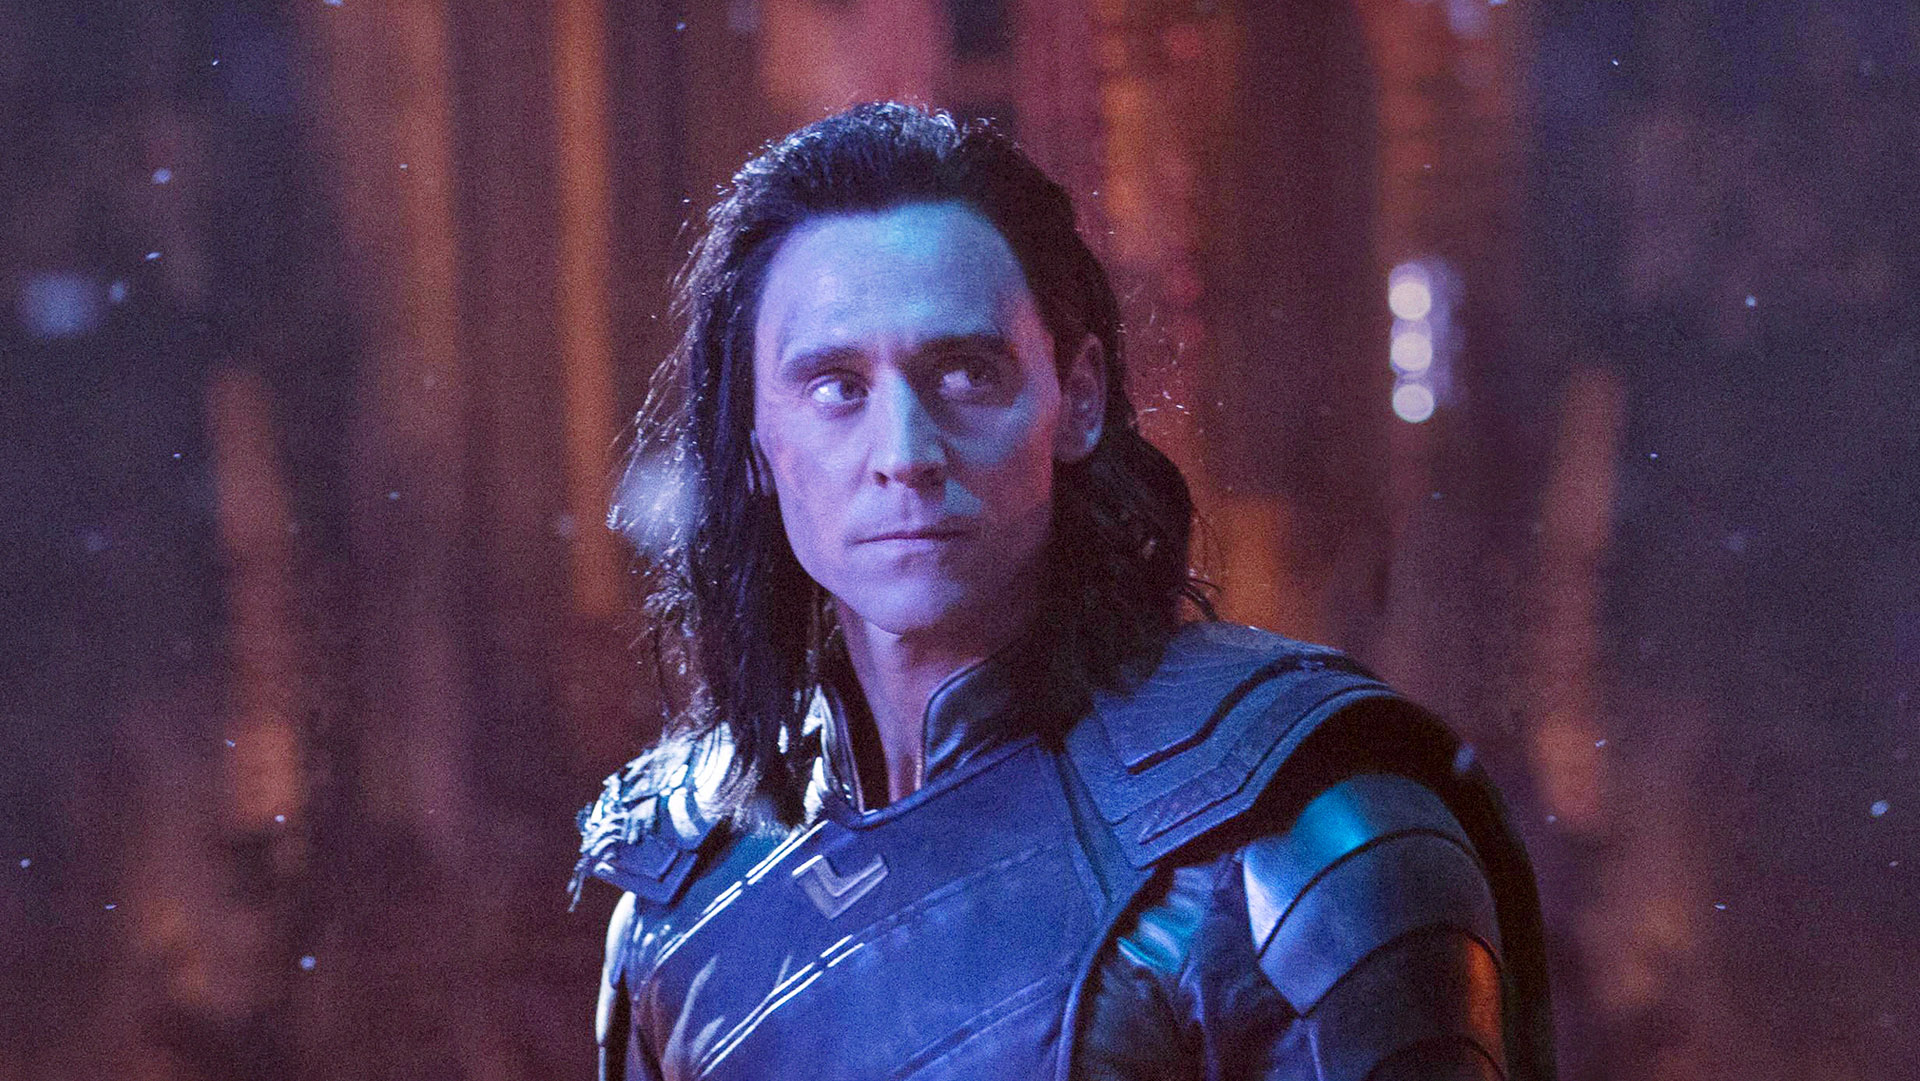 Fans Finally Getting That Loki Cameo They Wanted, But There's a Catch